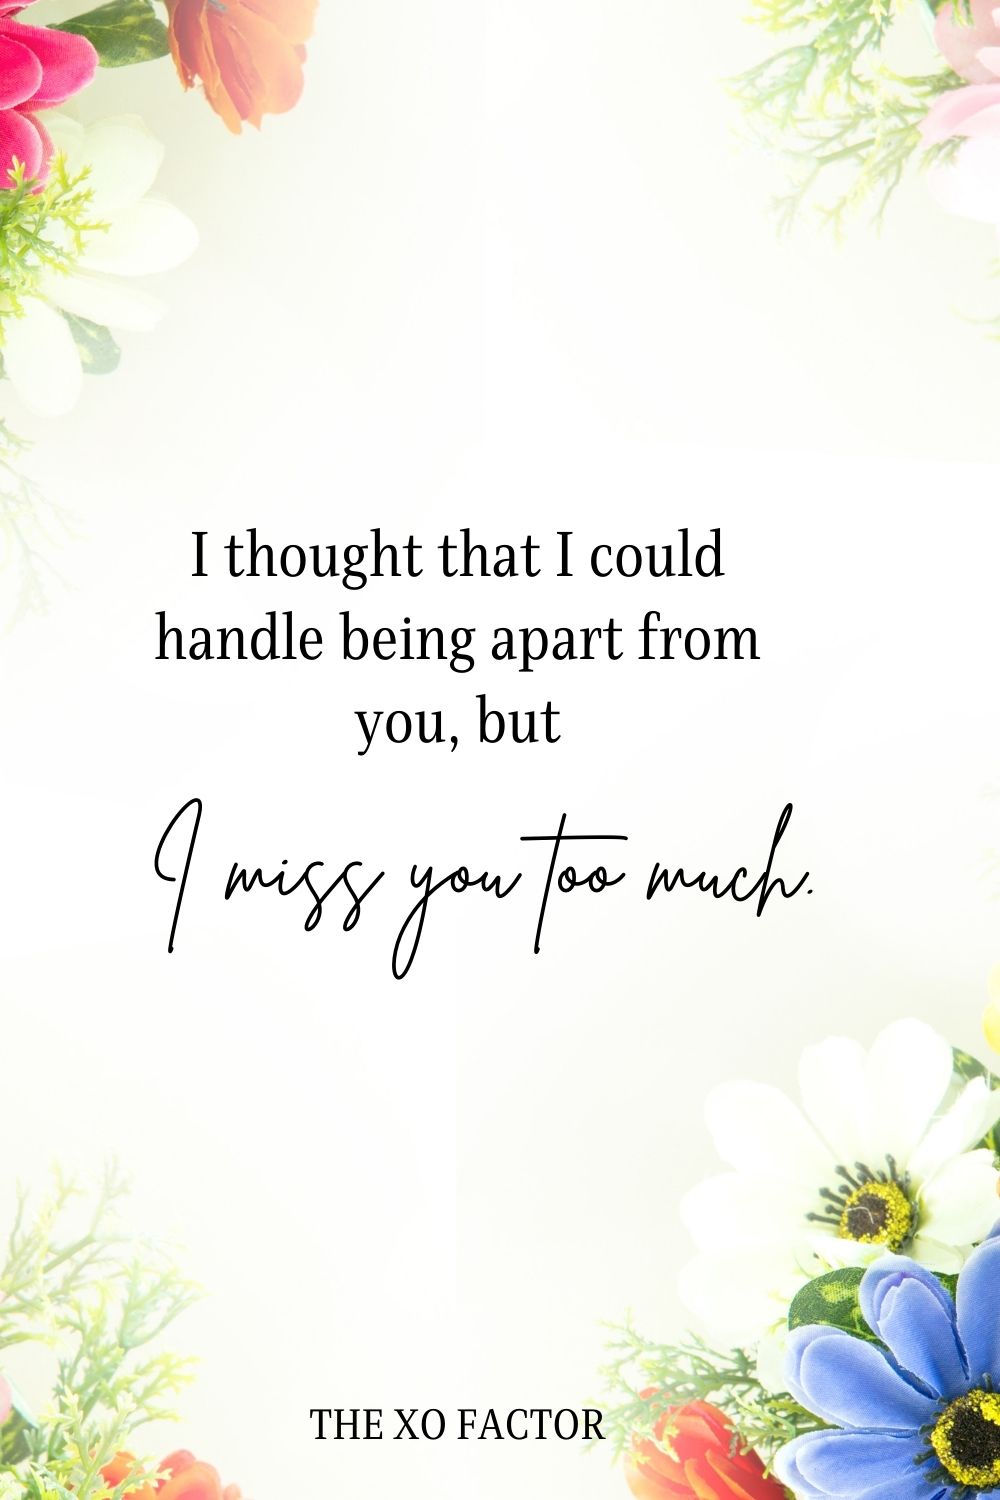 I thought that I could handle being apart from you, but I miss you too much.